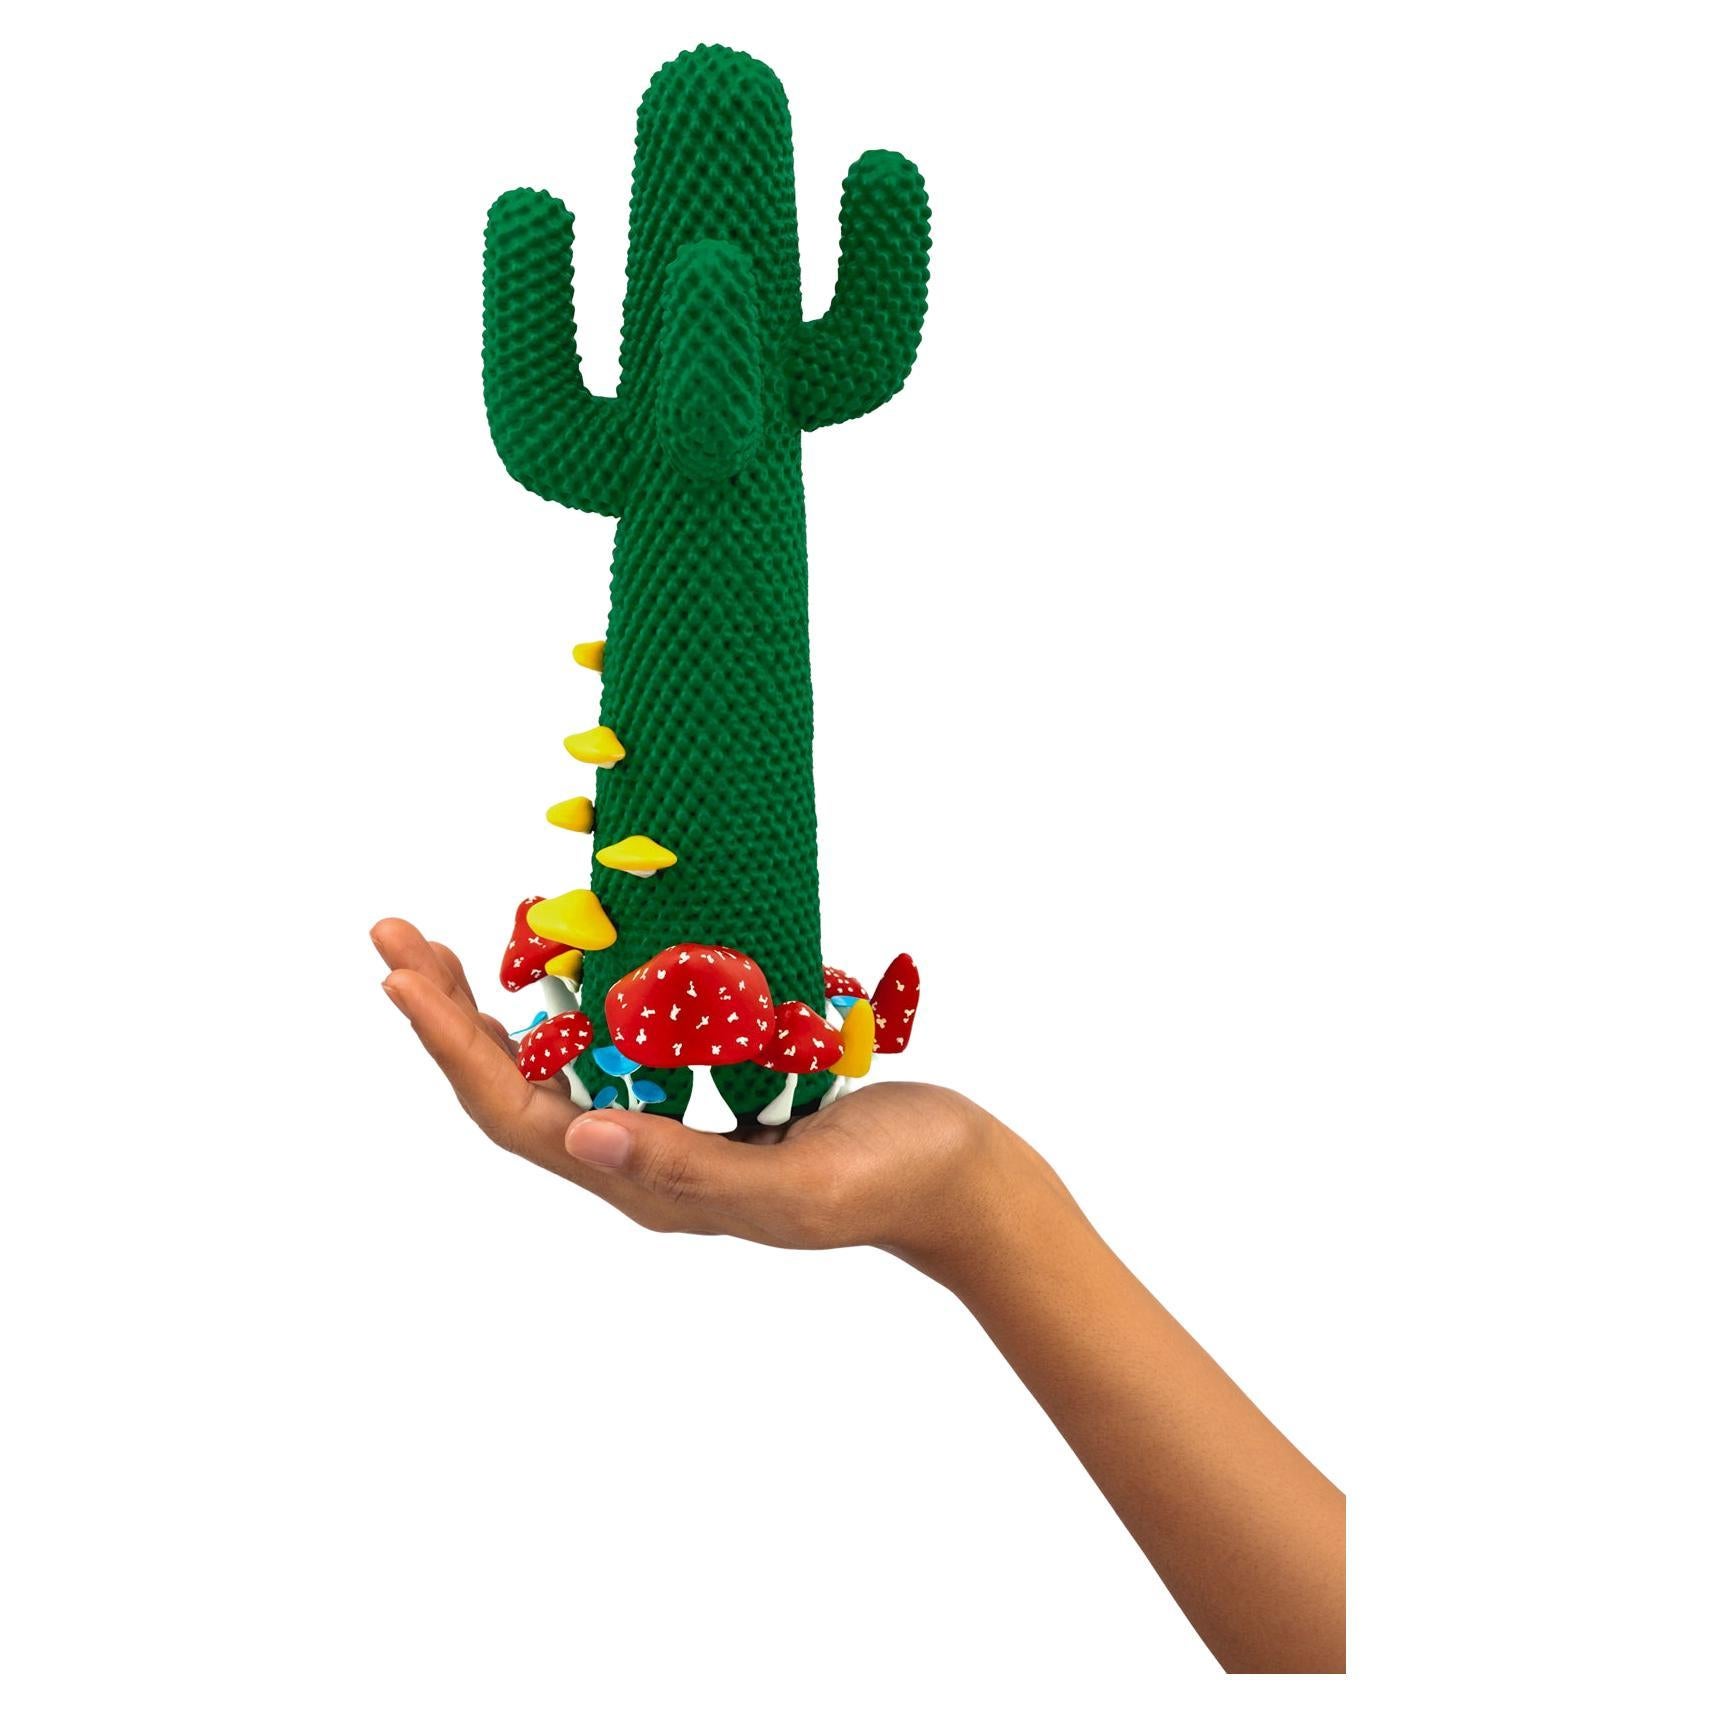 Limited edition #11/99

Gufram presents the miniaturised version of the Shroom CACTUS® created in collaboration with A$AP Rocky and the artist’s new design studio HOMMEMADE Exactly as the real-size Shroom CACTUS®, the new Guframini piece features